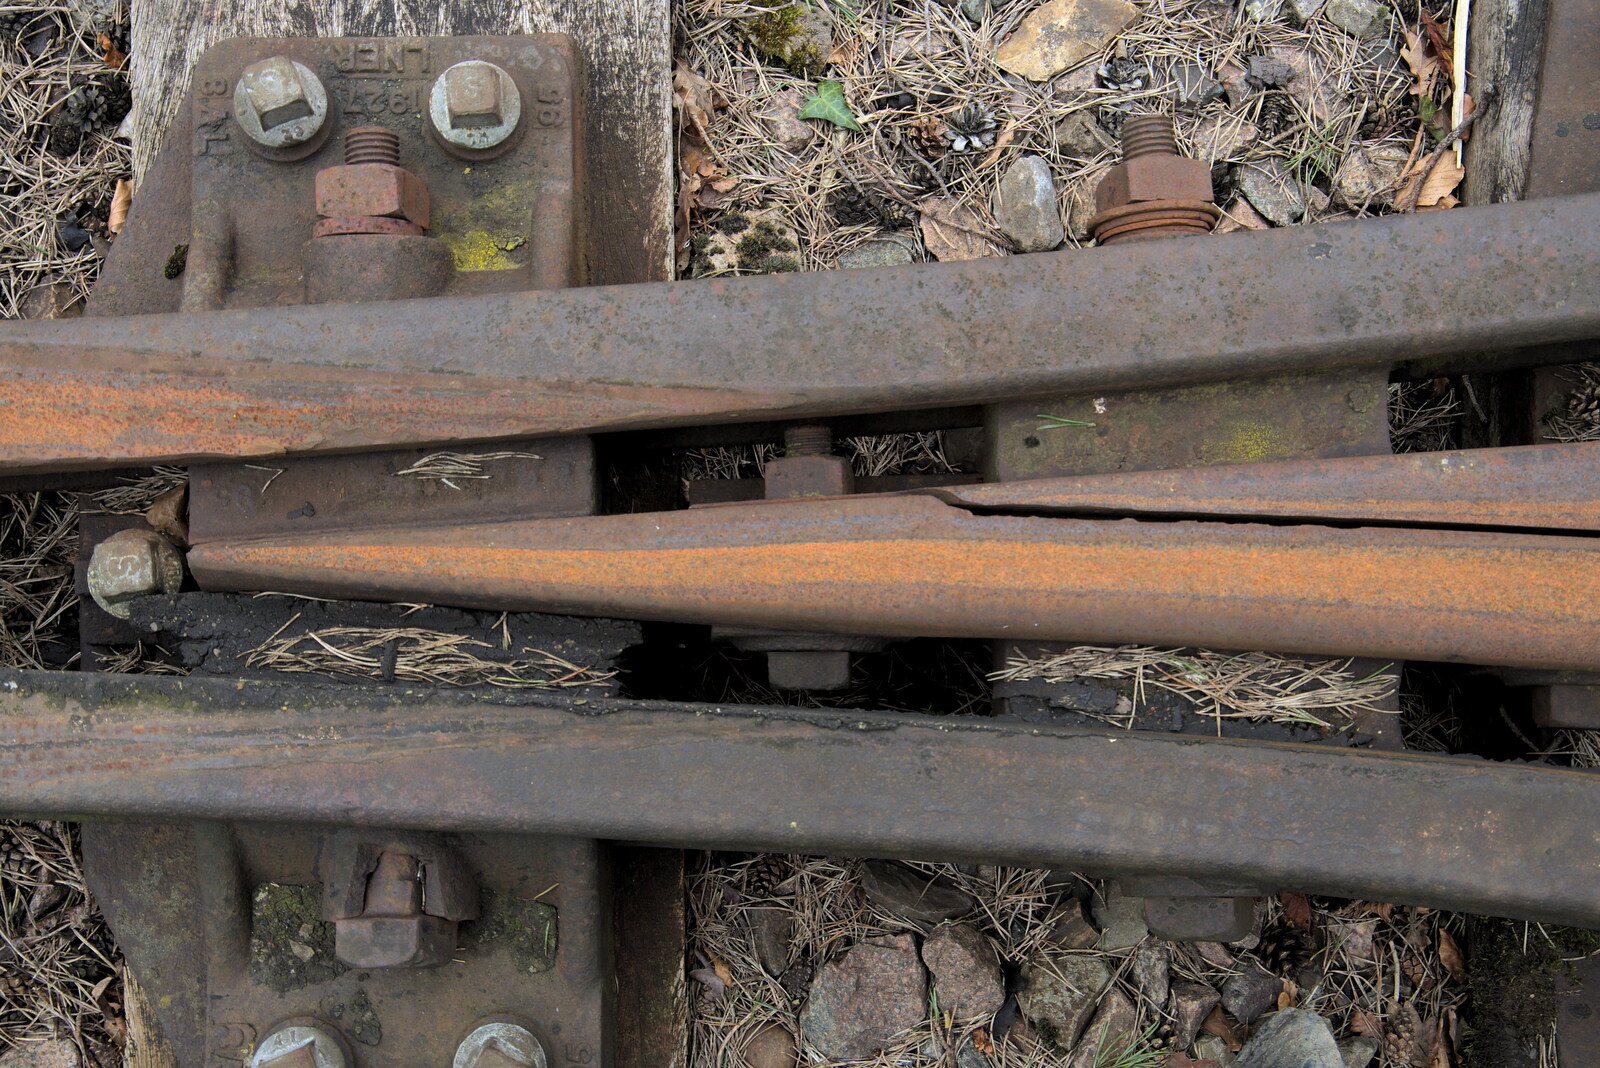 A cracked rail in some points from A Return to Bressingham Steam and Gardens, Bressingham, Norfolk - 28th March 2021